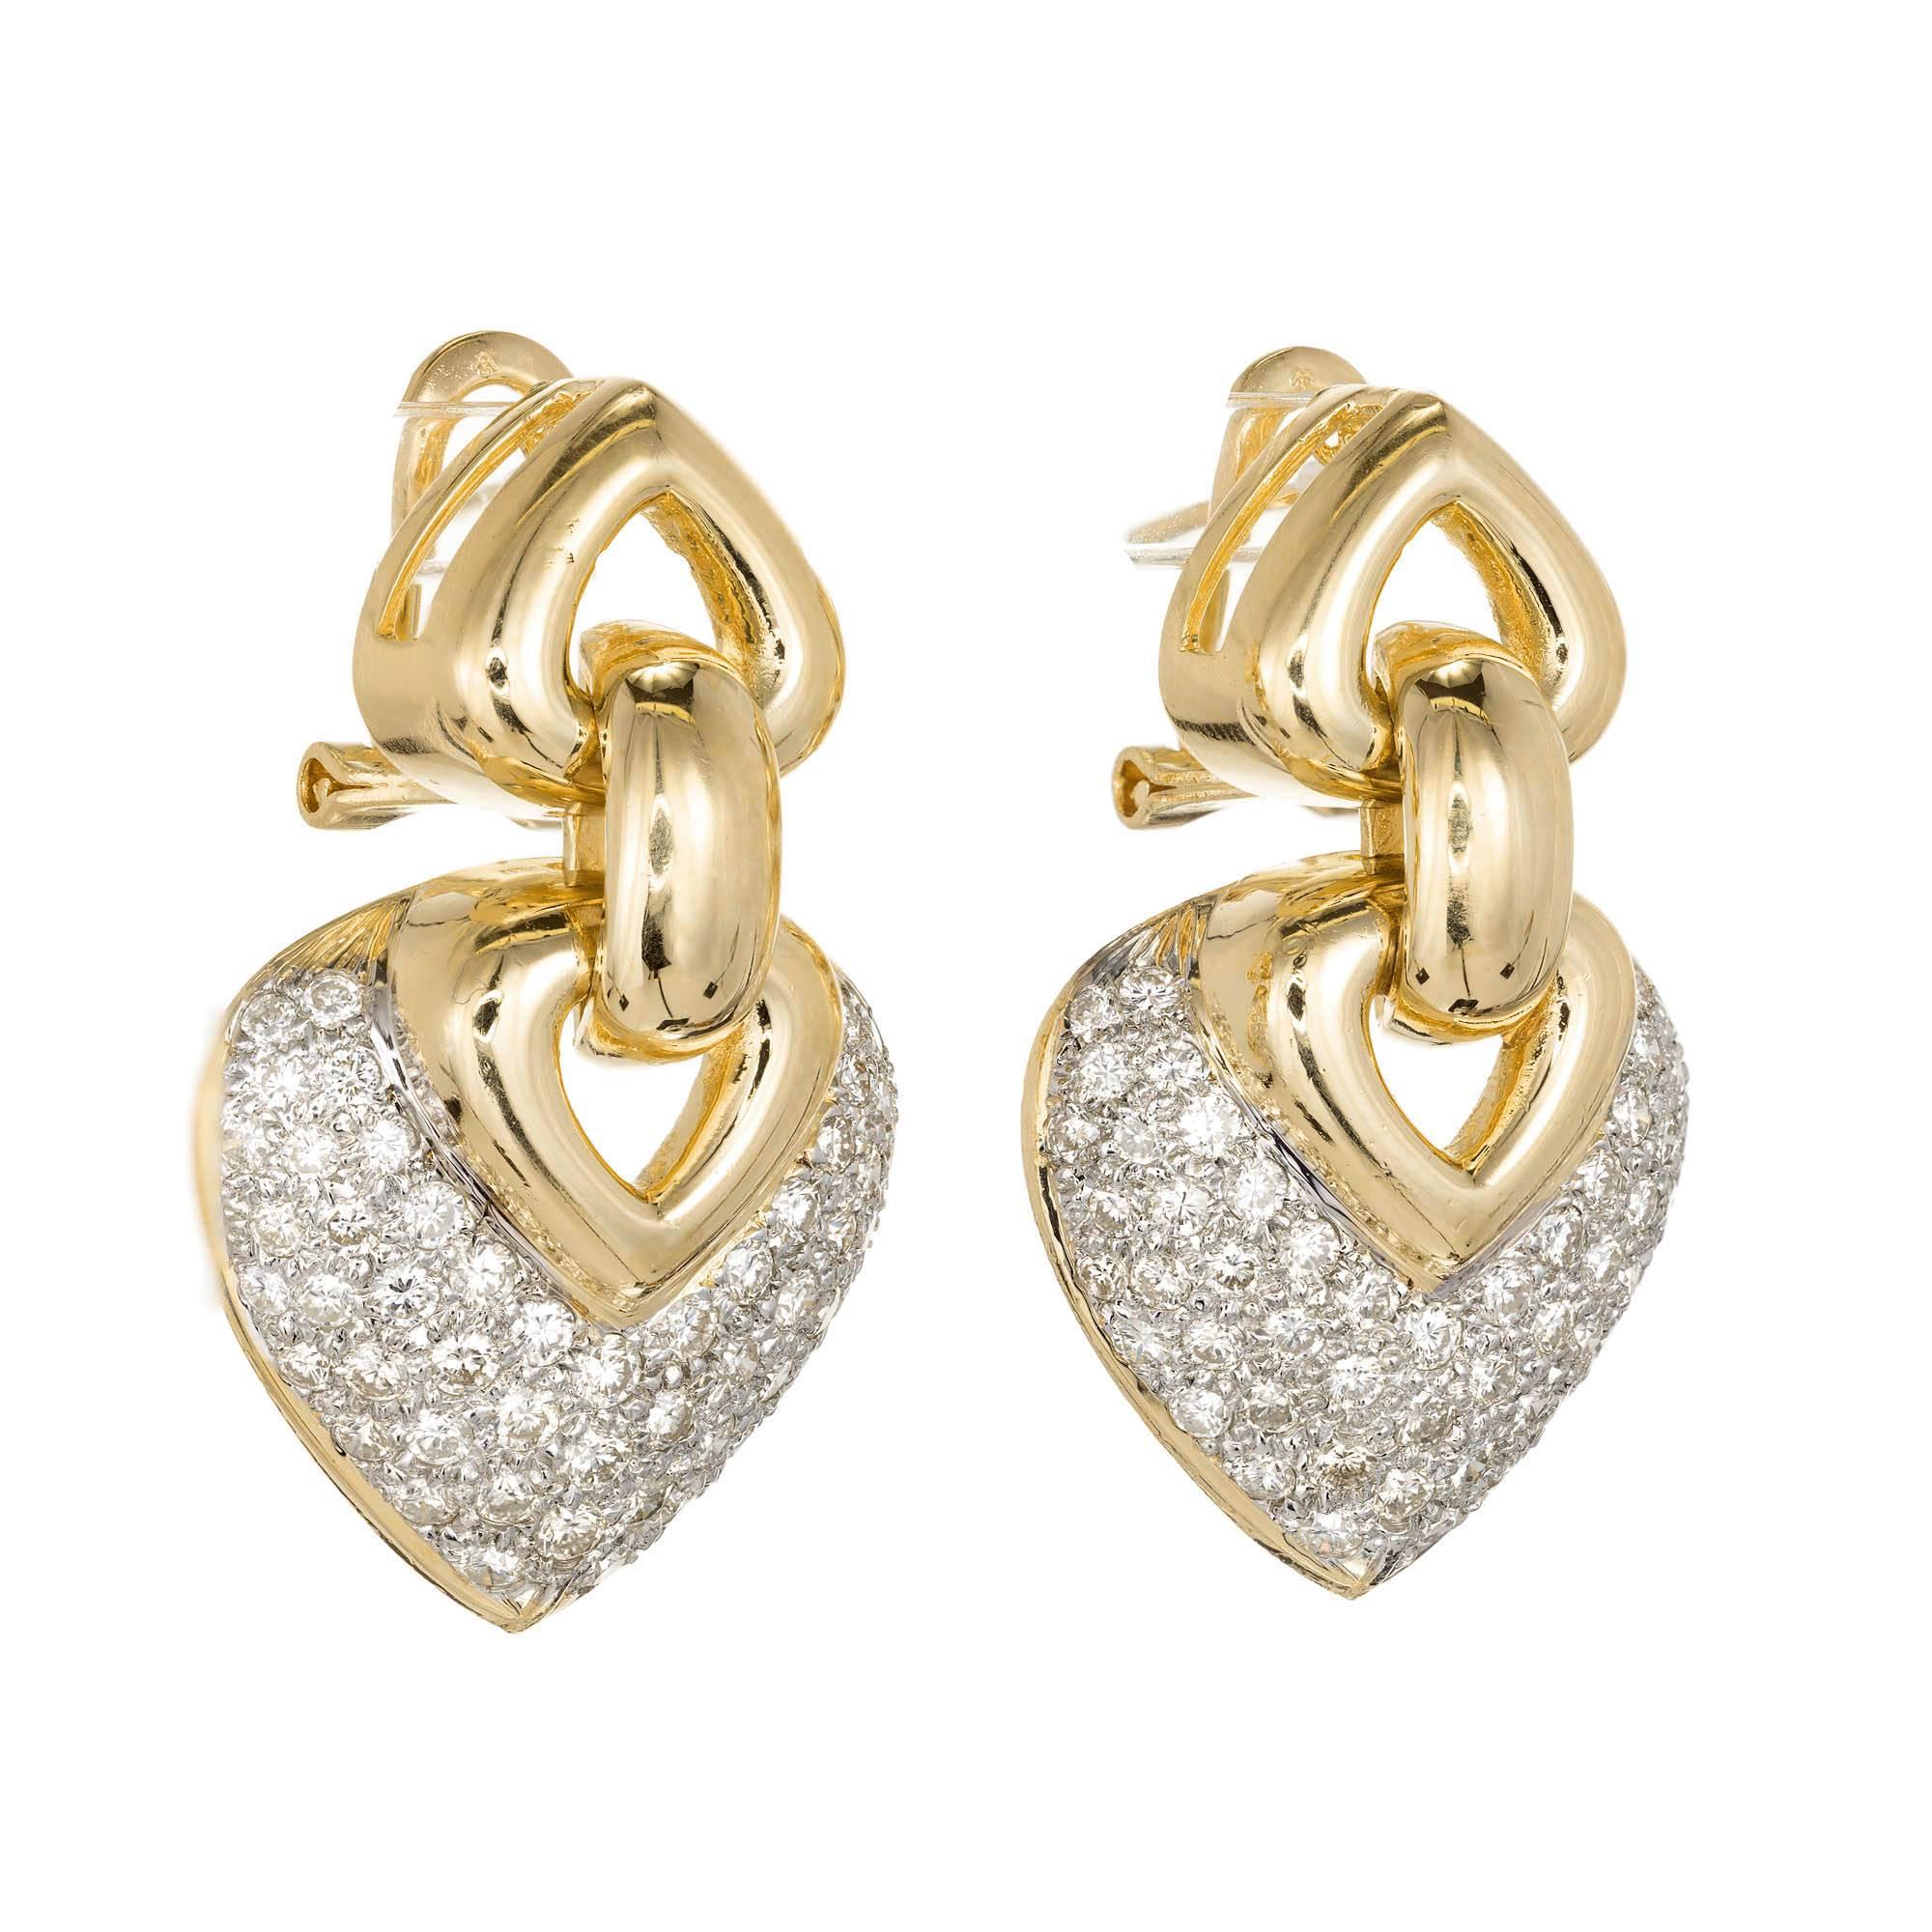 Classic vintage 1970s dangle diamond earrings in 18k yellow gold with white gold under bright white sparkly full cut diamonds. Excellent brilliance, movement and sparkle. Shield shape dangle.

102 round full cut diamonds, approx. total weight